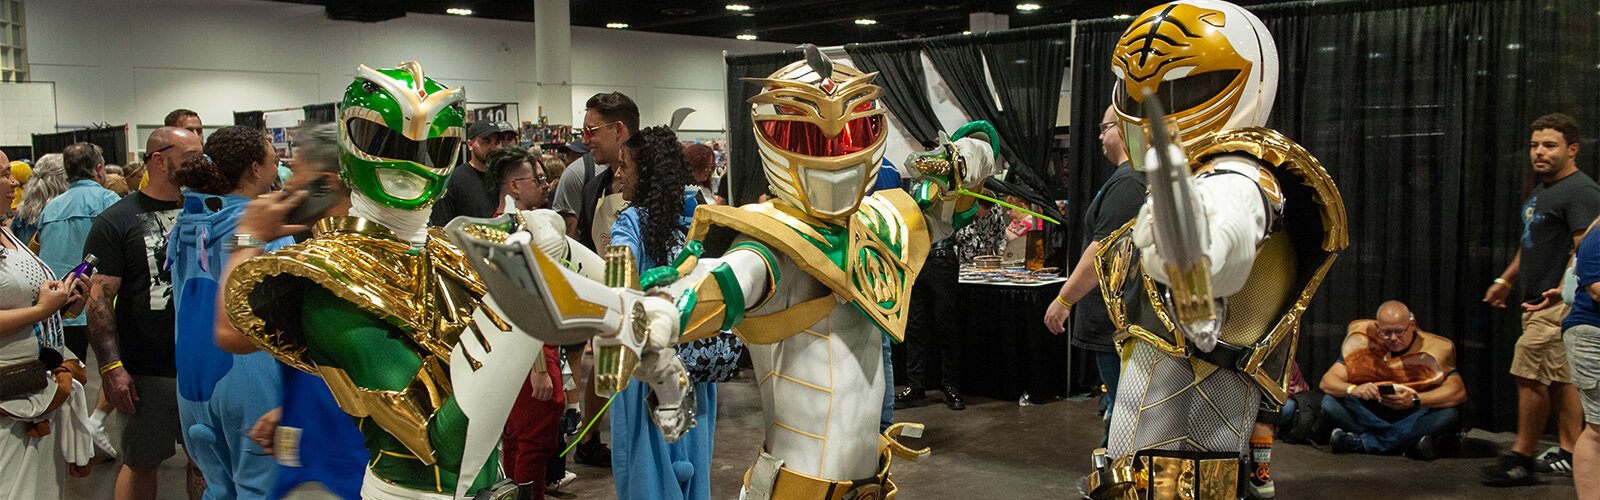 Aramis Jackson, Tabares Peake and Mikey Rios dressed as the Power Rangers at this year's Tampa Bay Comic Convention at the Tampa Convention Center.